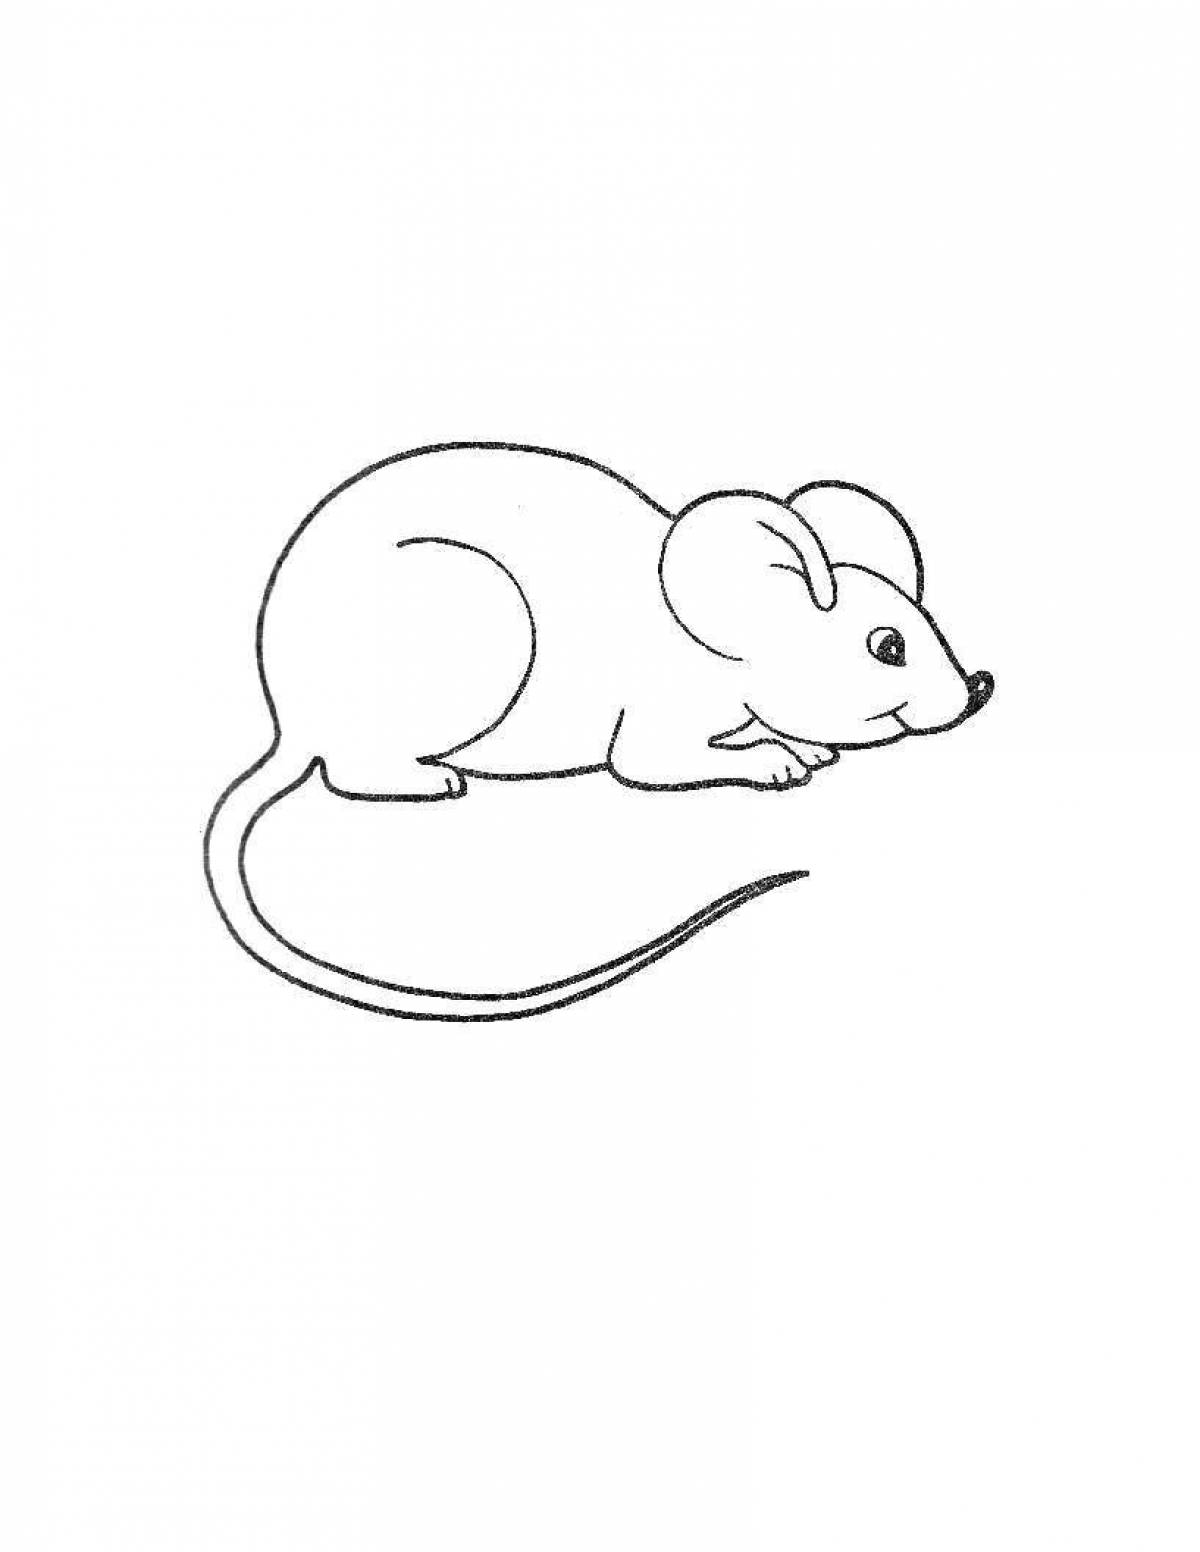 Adorable mouse coloring book for kids